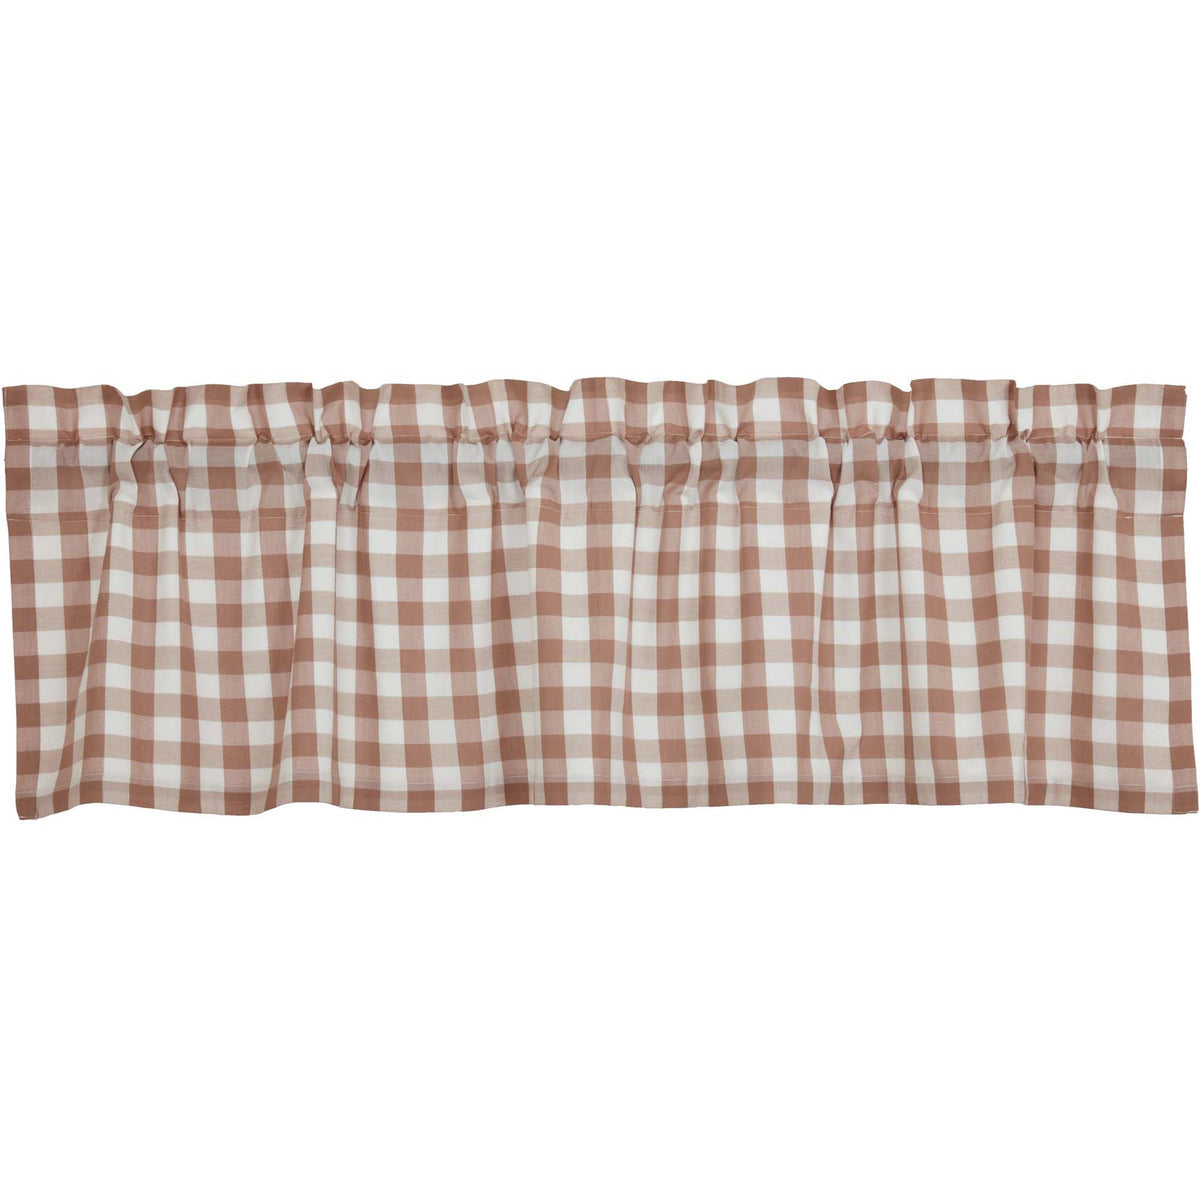 April & Olive Annie Buffalo Portabella Check Valance 16x60 By VHC Brands